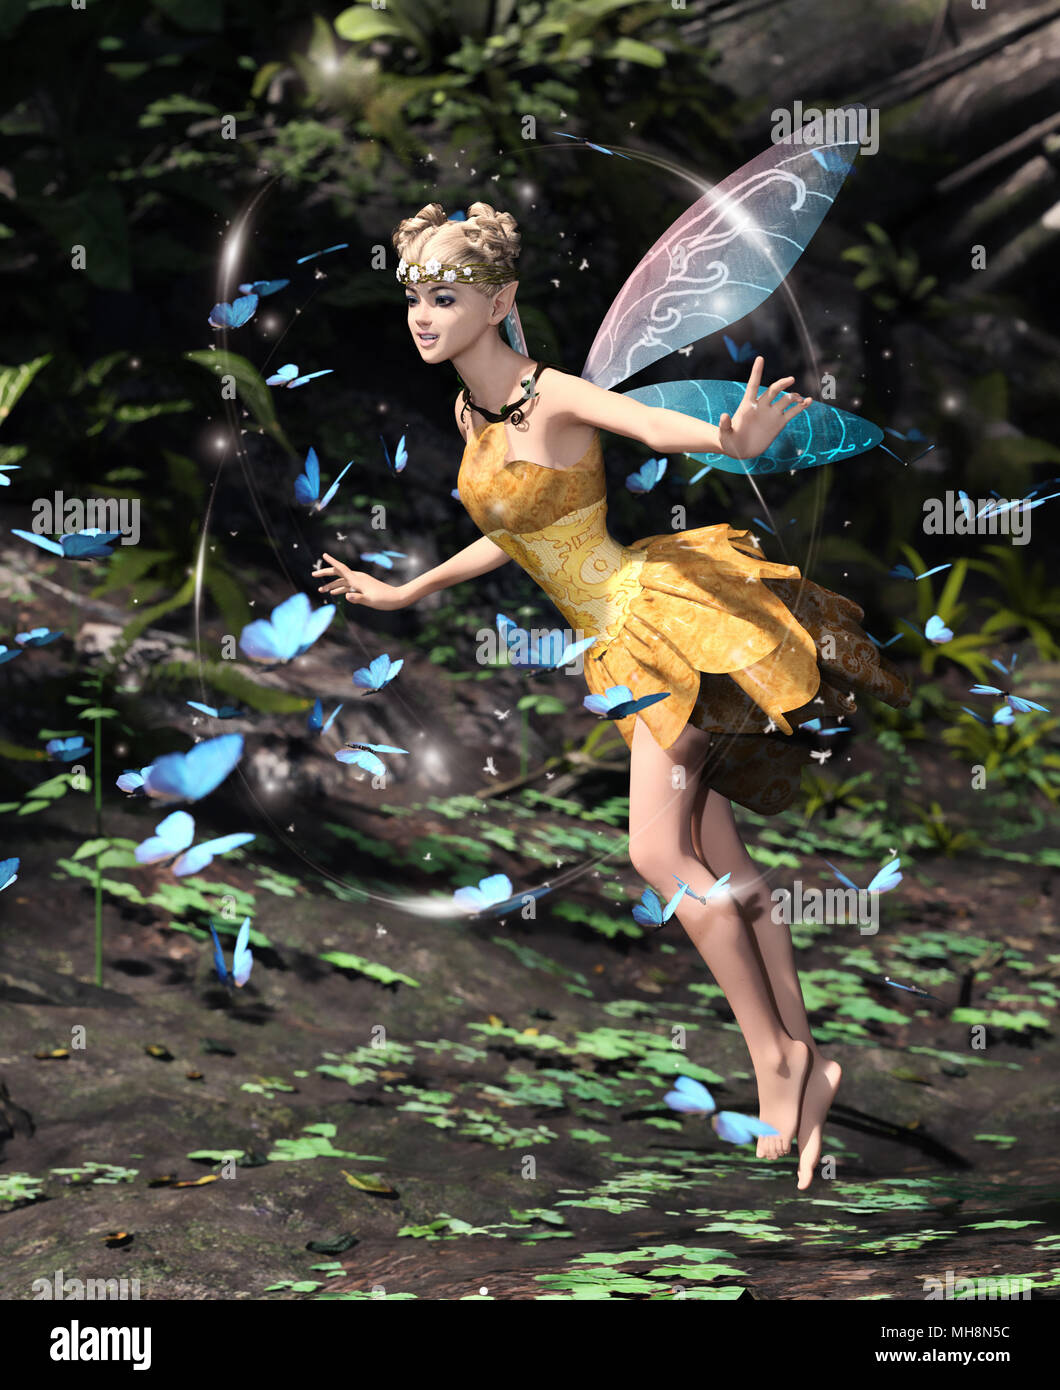 3d rendering of a fairy flying in a magical forest surrounded by flock butterflies Stock Photo